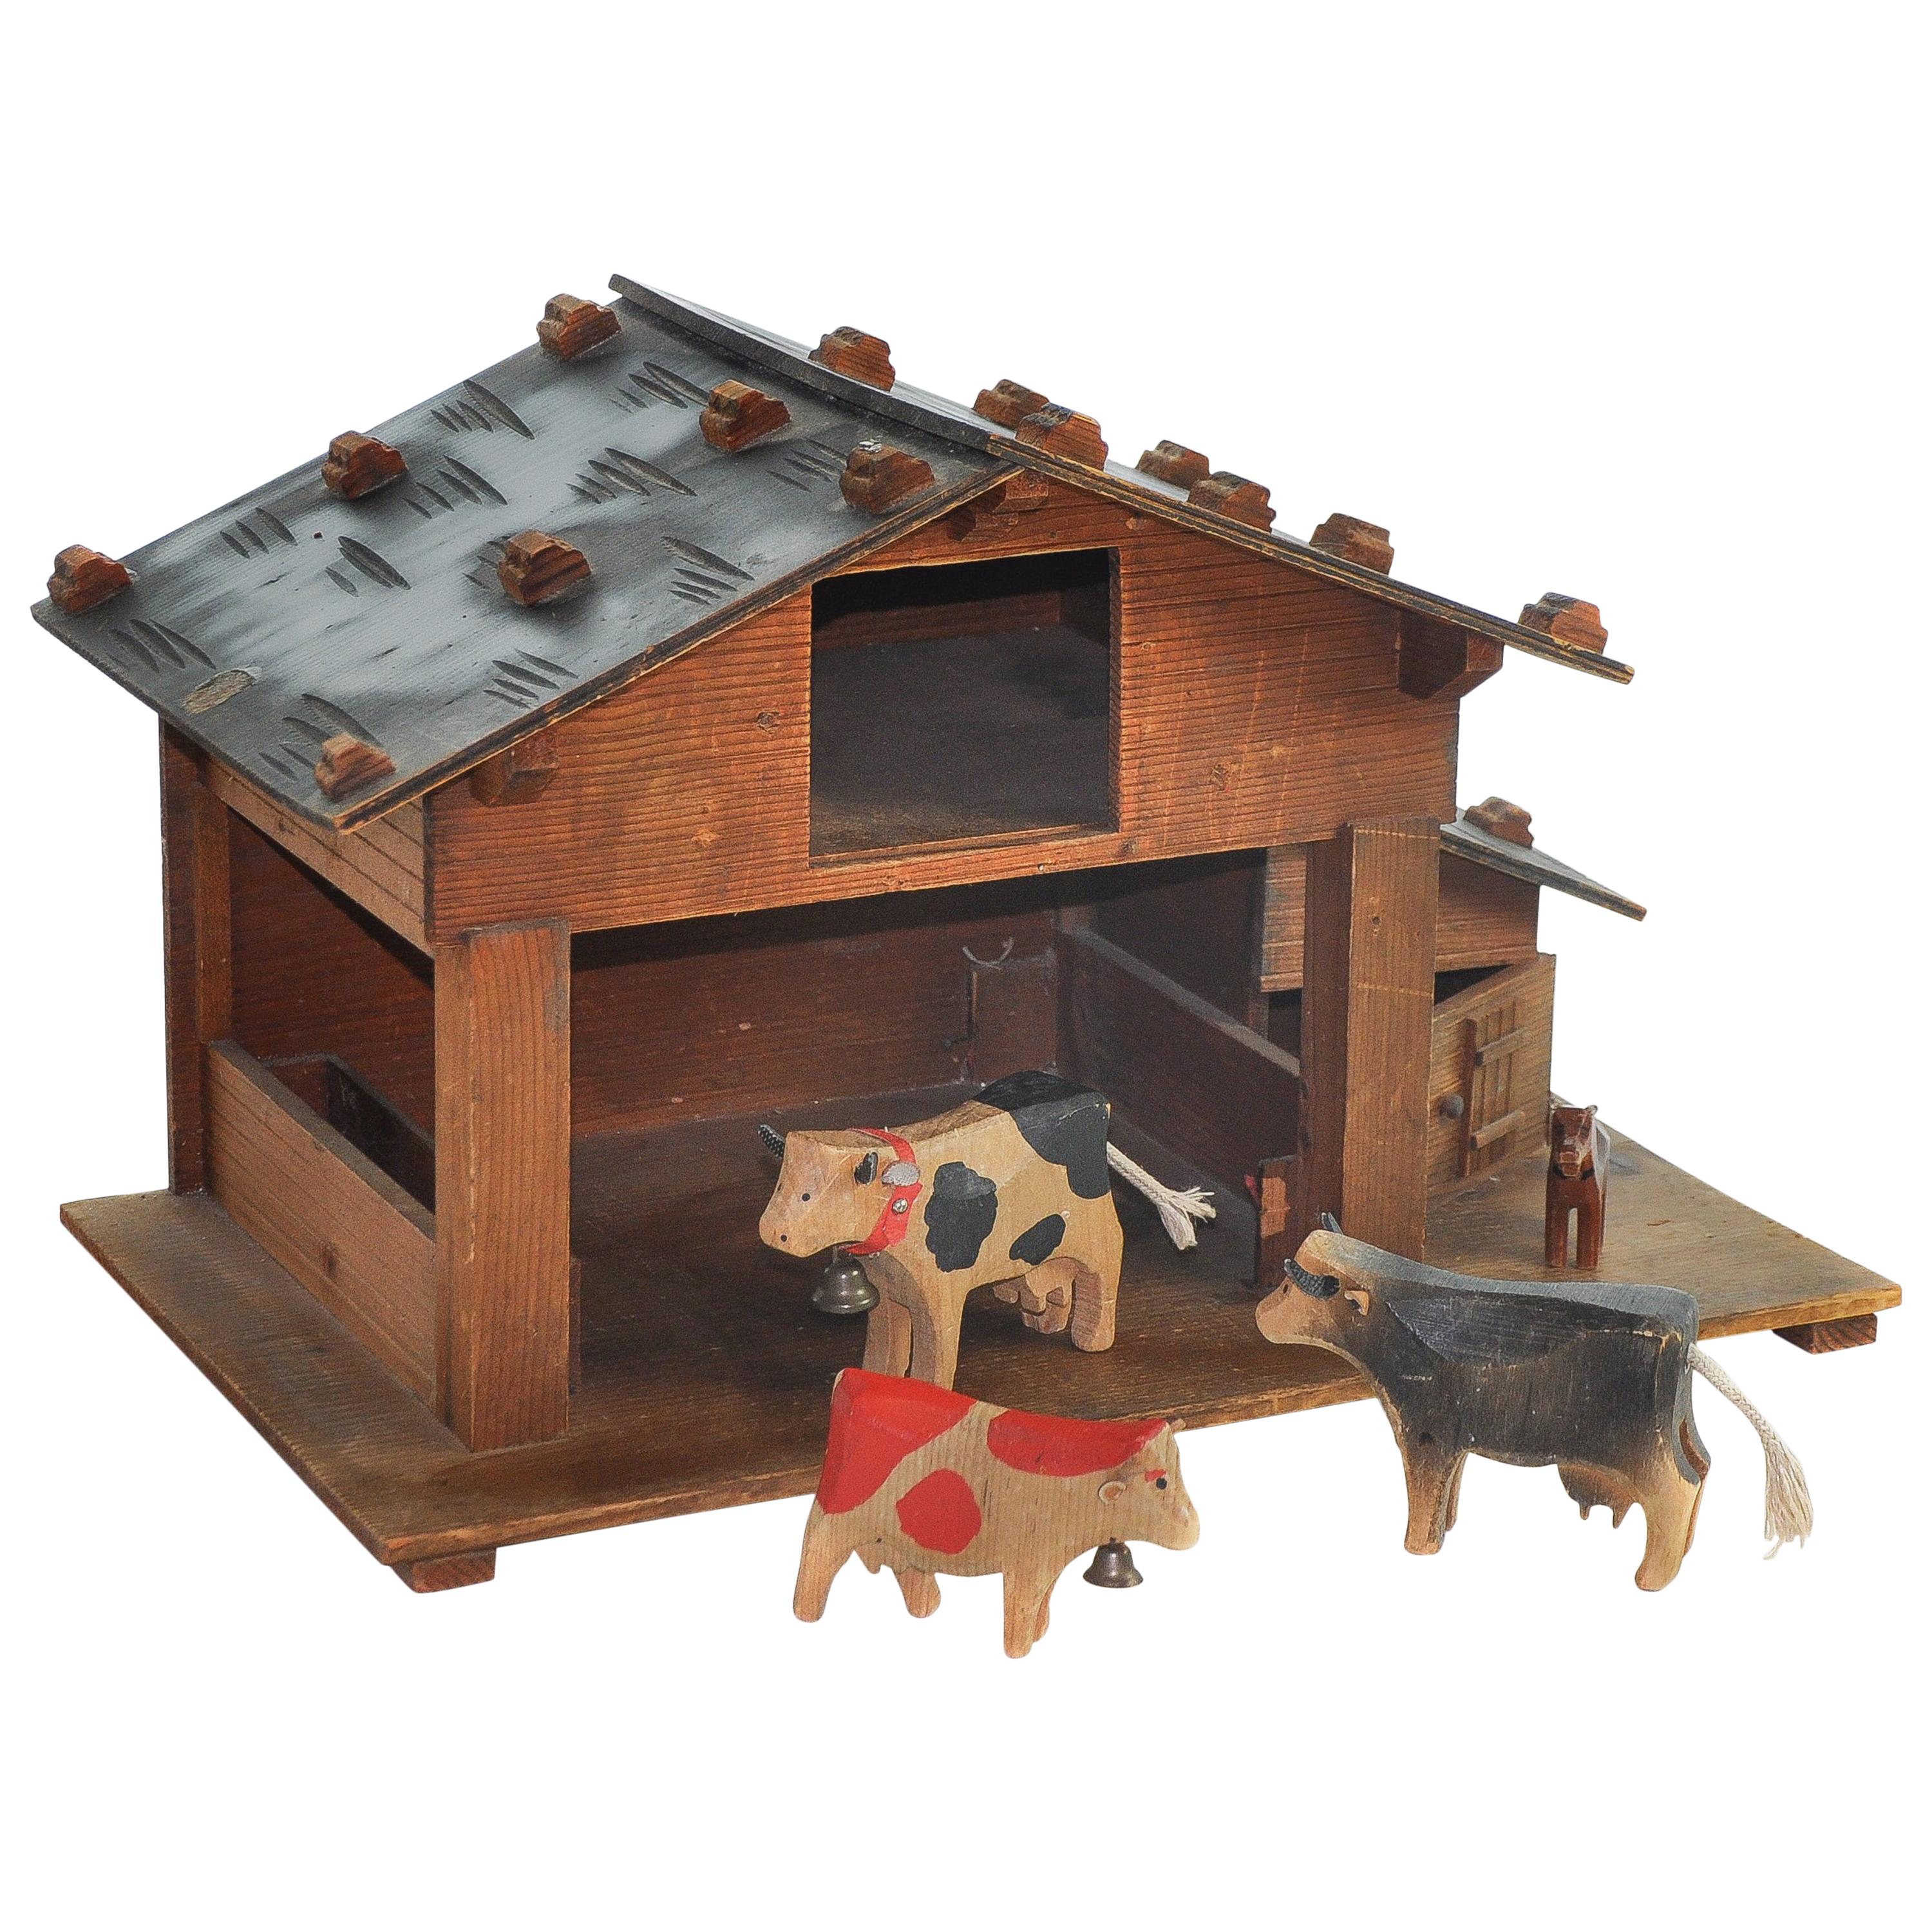 Swiss Folk Art from 1950s, Hand carved Alpine Stable with Animals